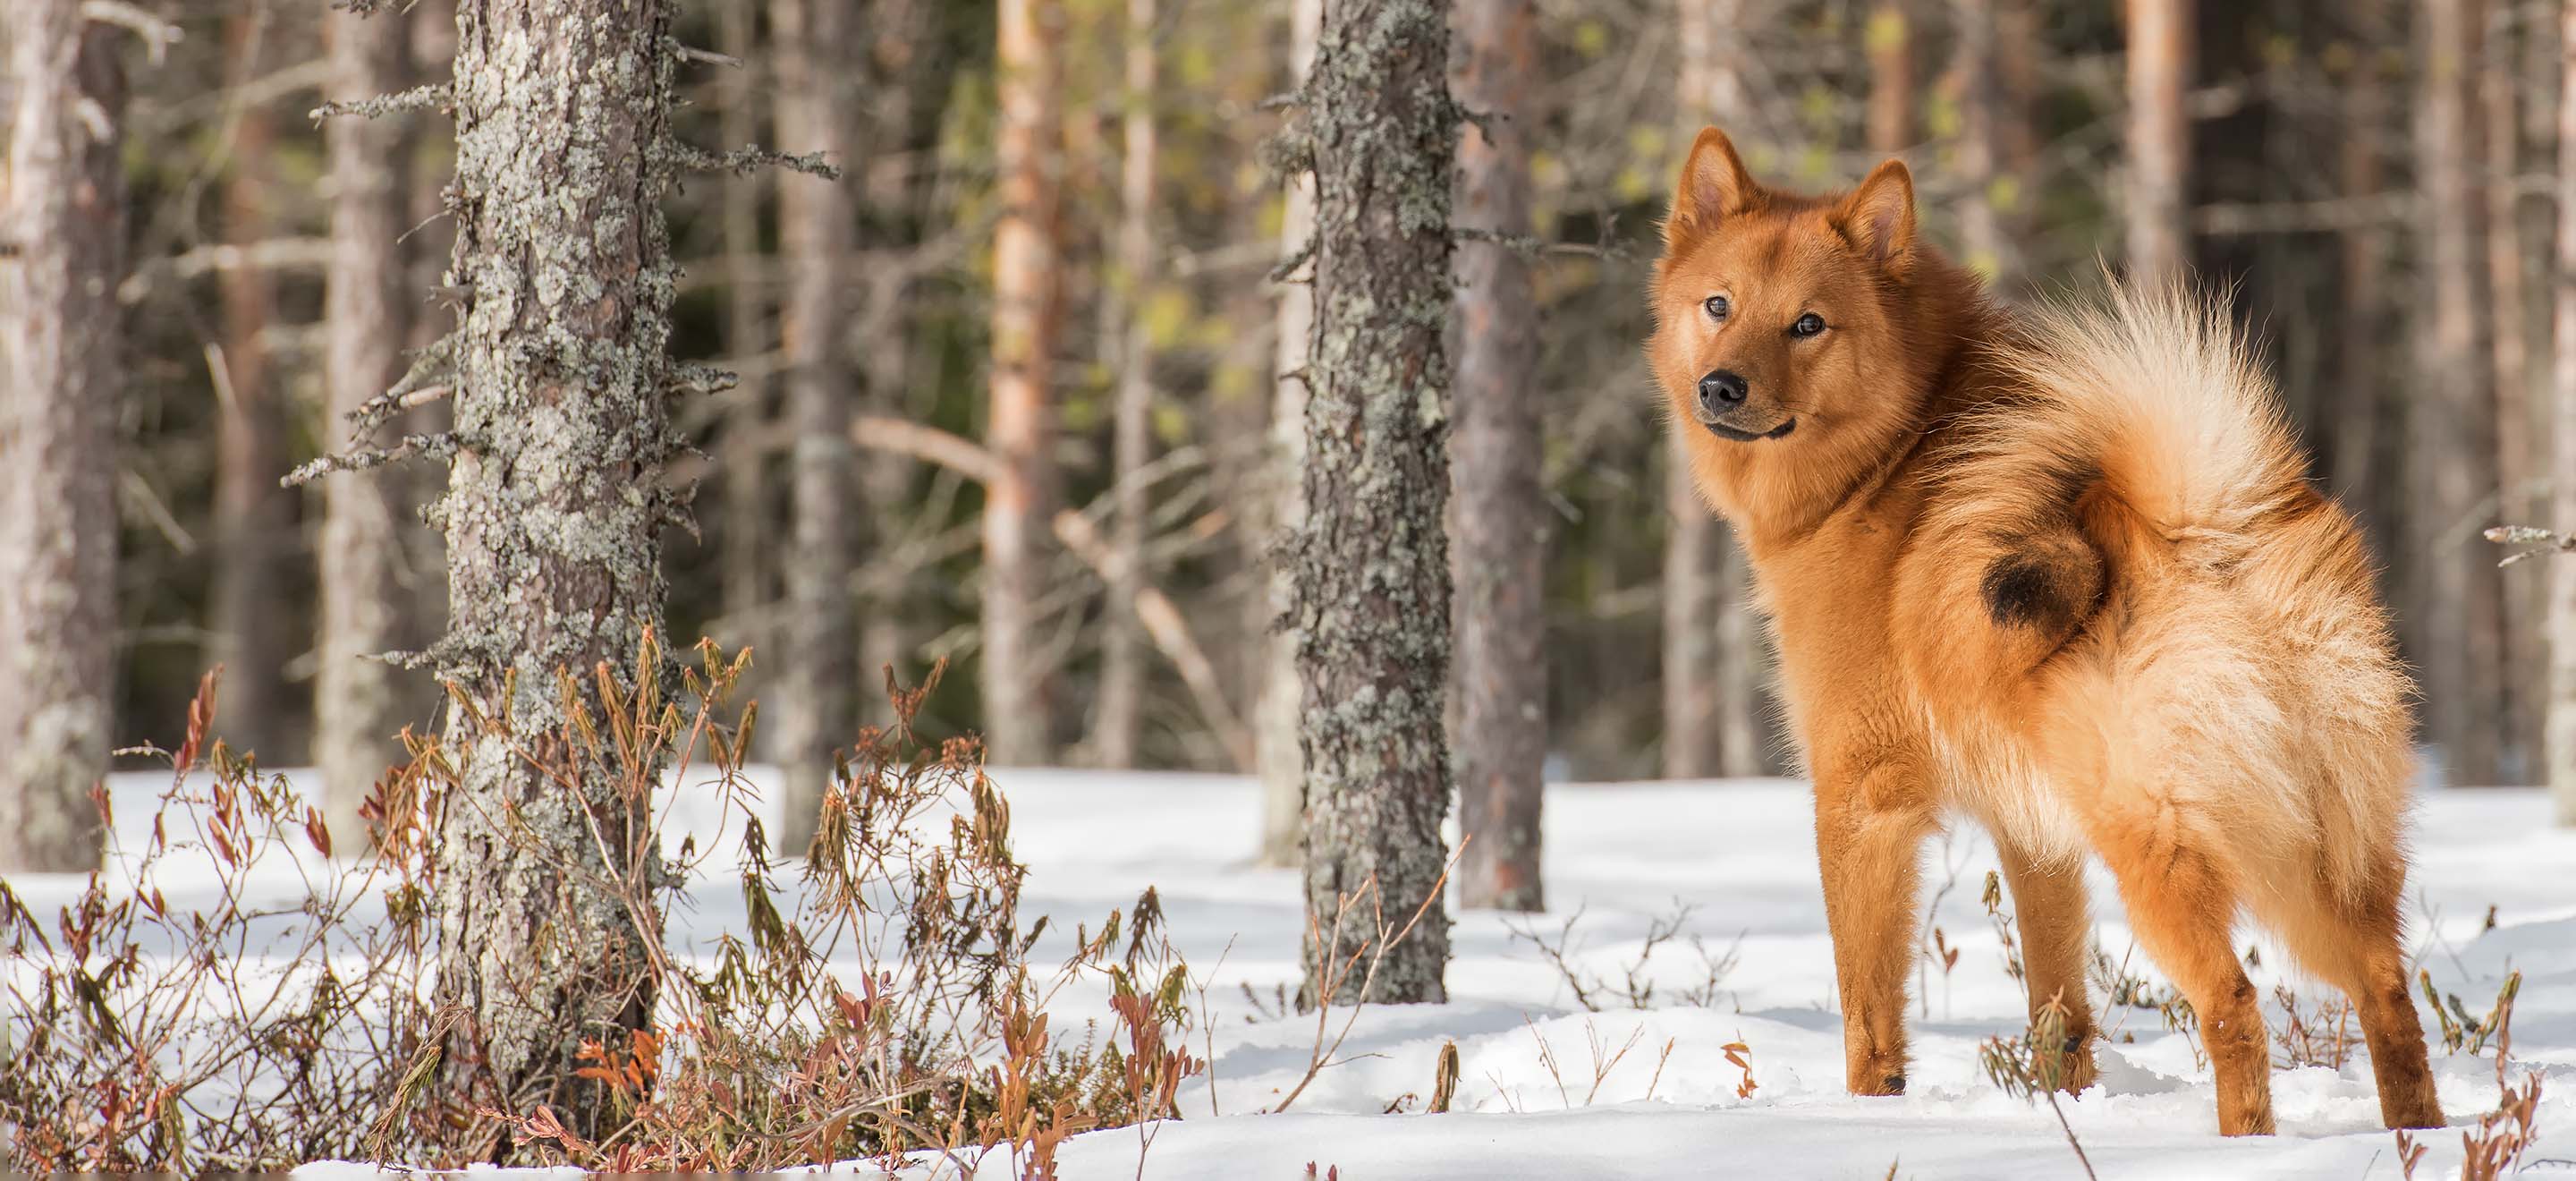 Red Finnish Spitz dog standing in a snowy forest image